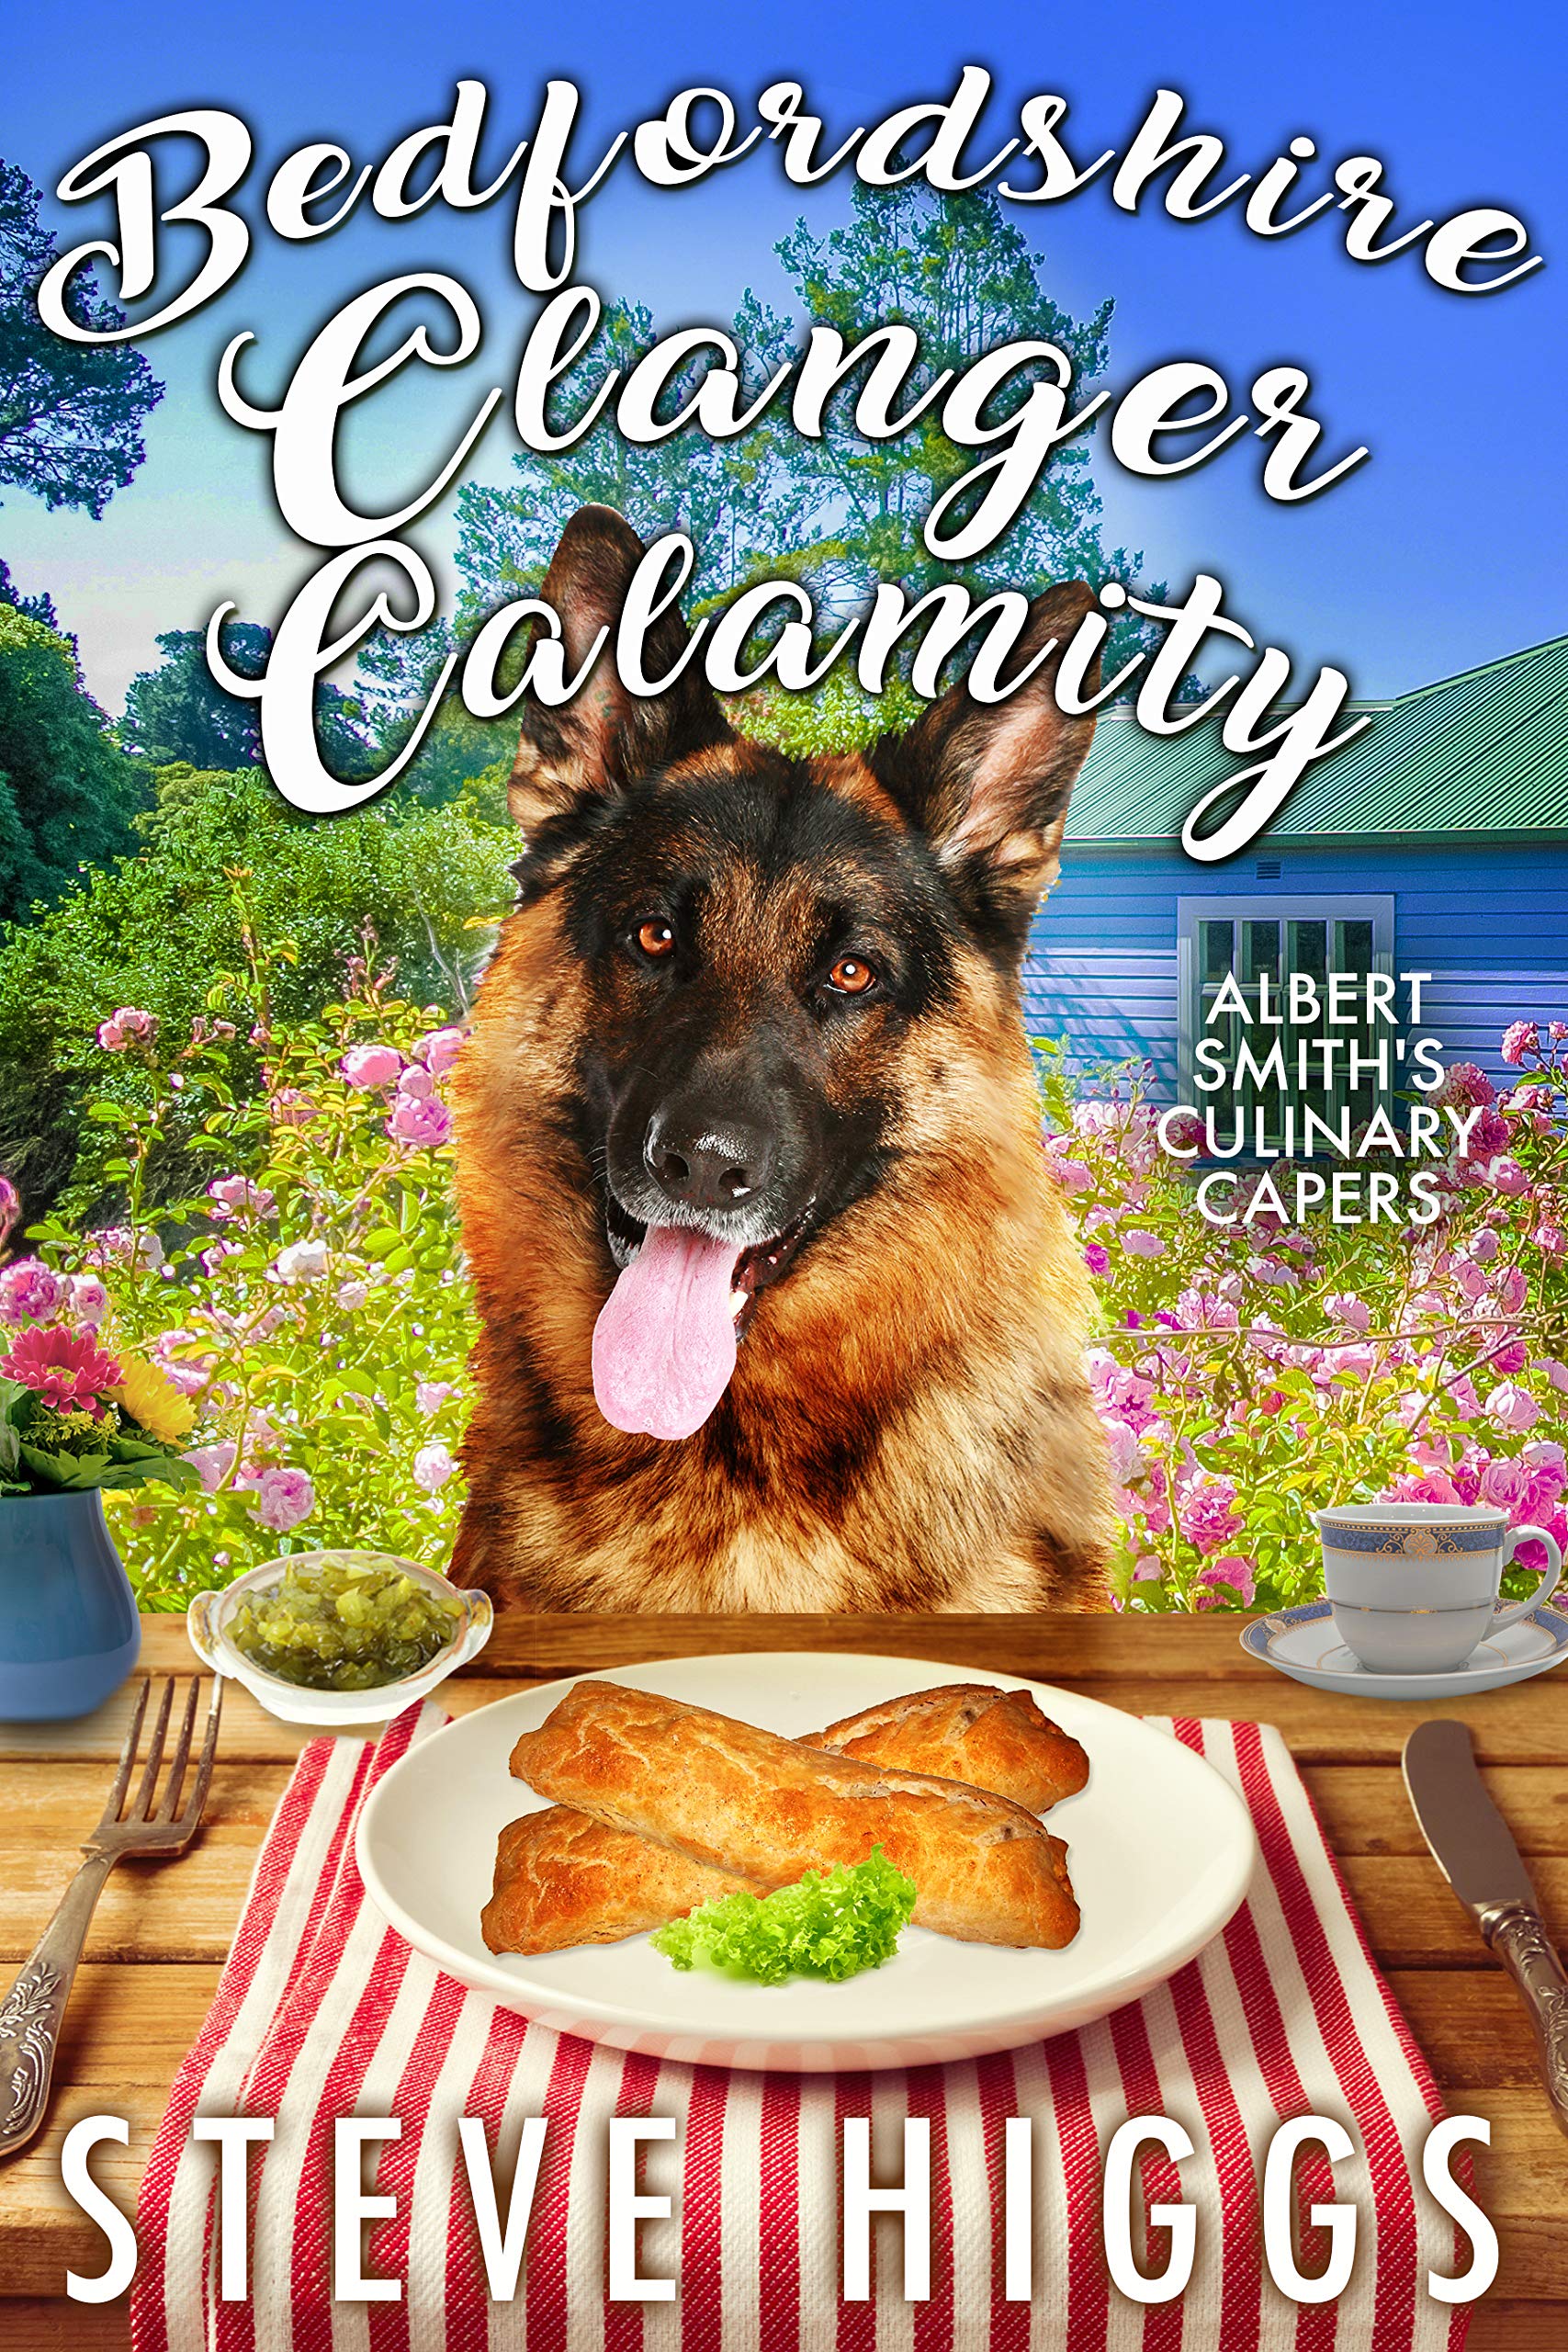 Bedfordshire Clanger Calamity book cover